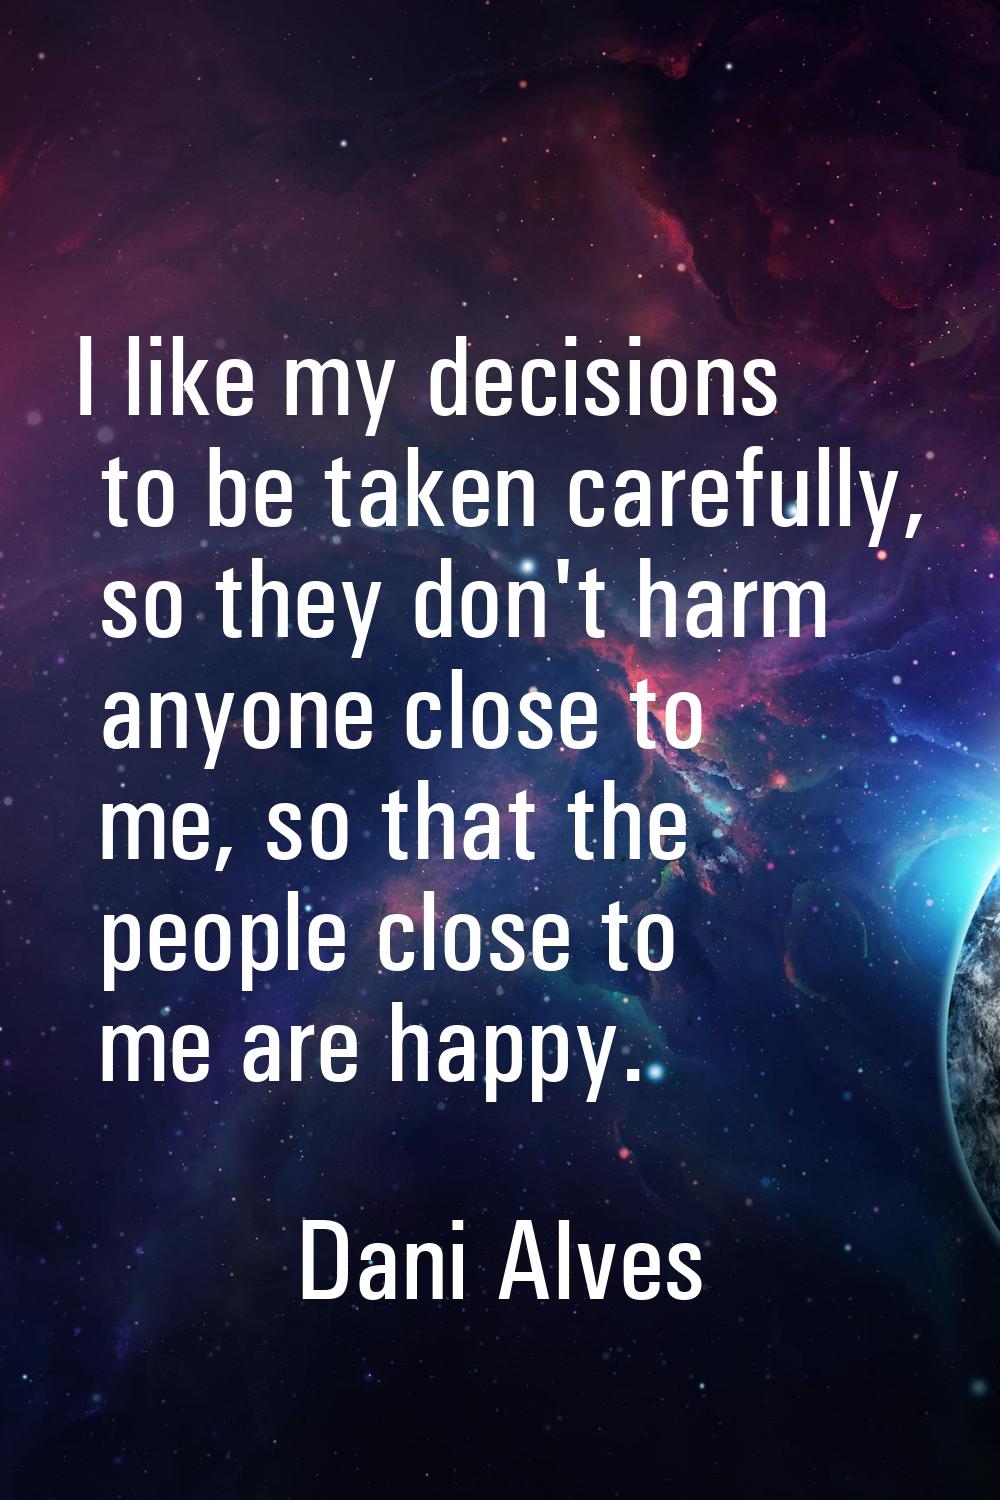 I like my decisions to be taken carefully, so they don't harm anyone close to me, so that the peopl